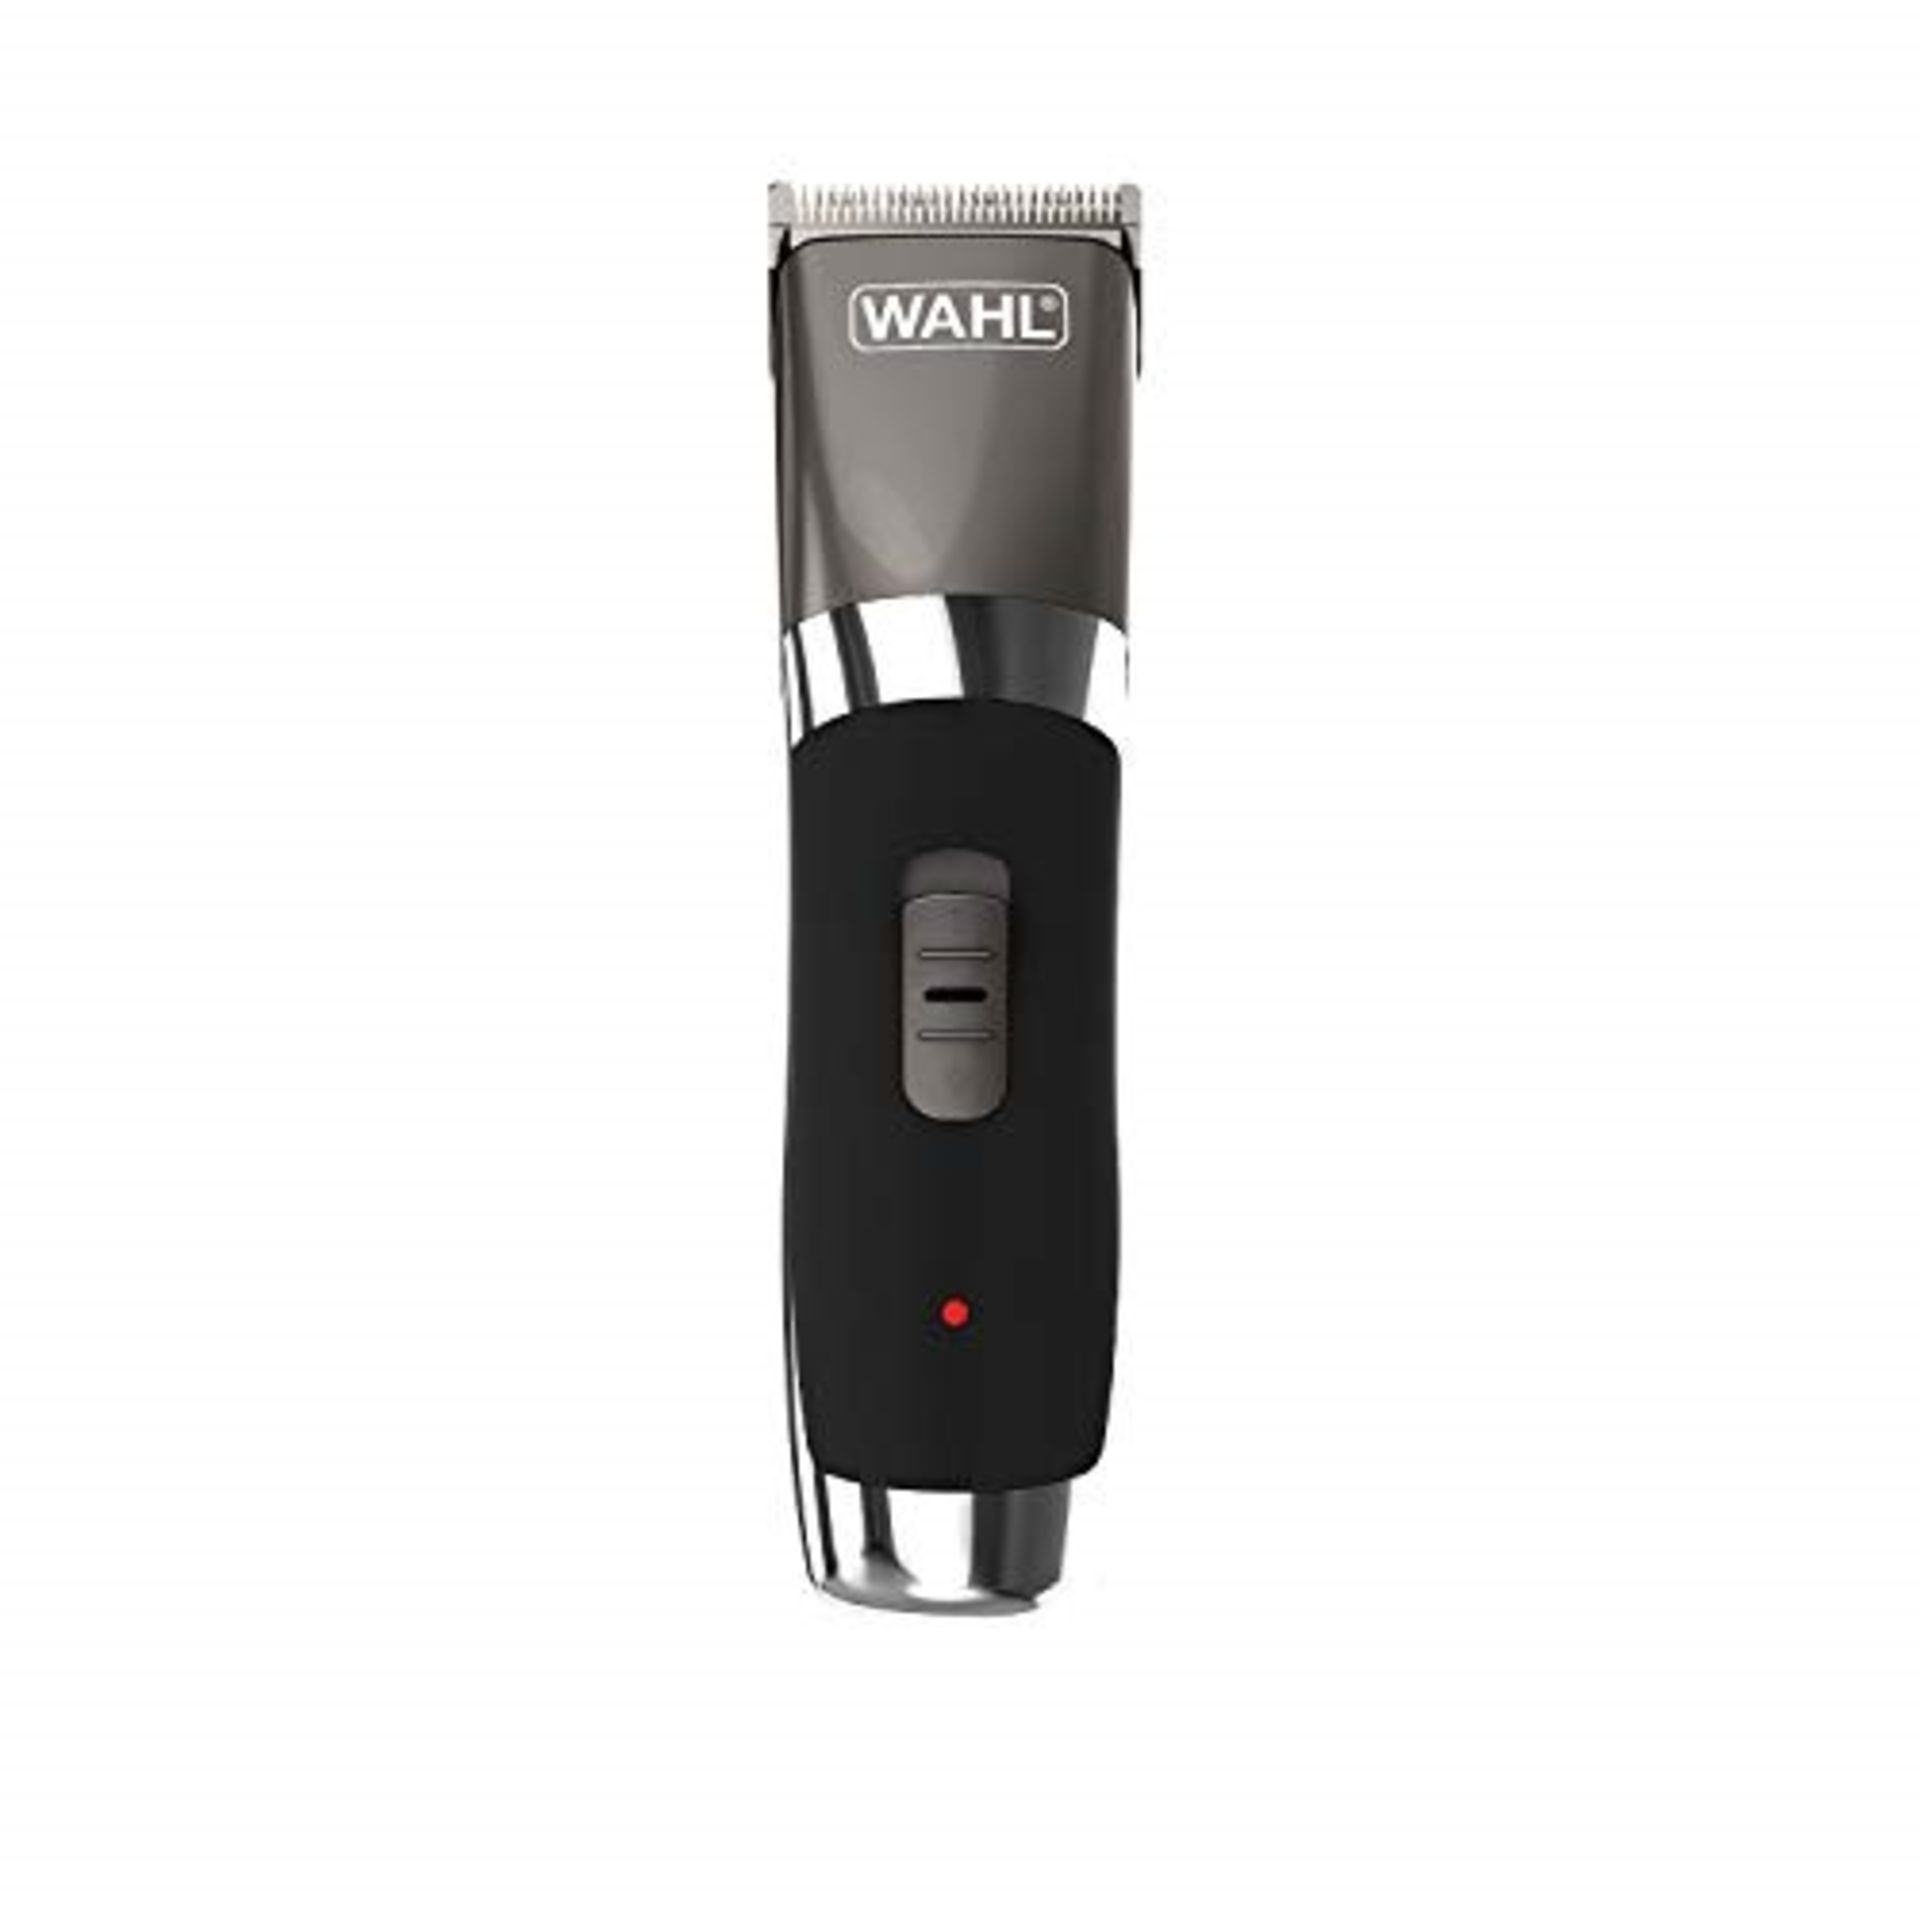 COMBINED RRP £104.00 LOT TO CONTAIN 6 ASSORTED Personal Care Appliances: Wahl, Wahl, Wahl, Wahl - Image 2 of 7